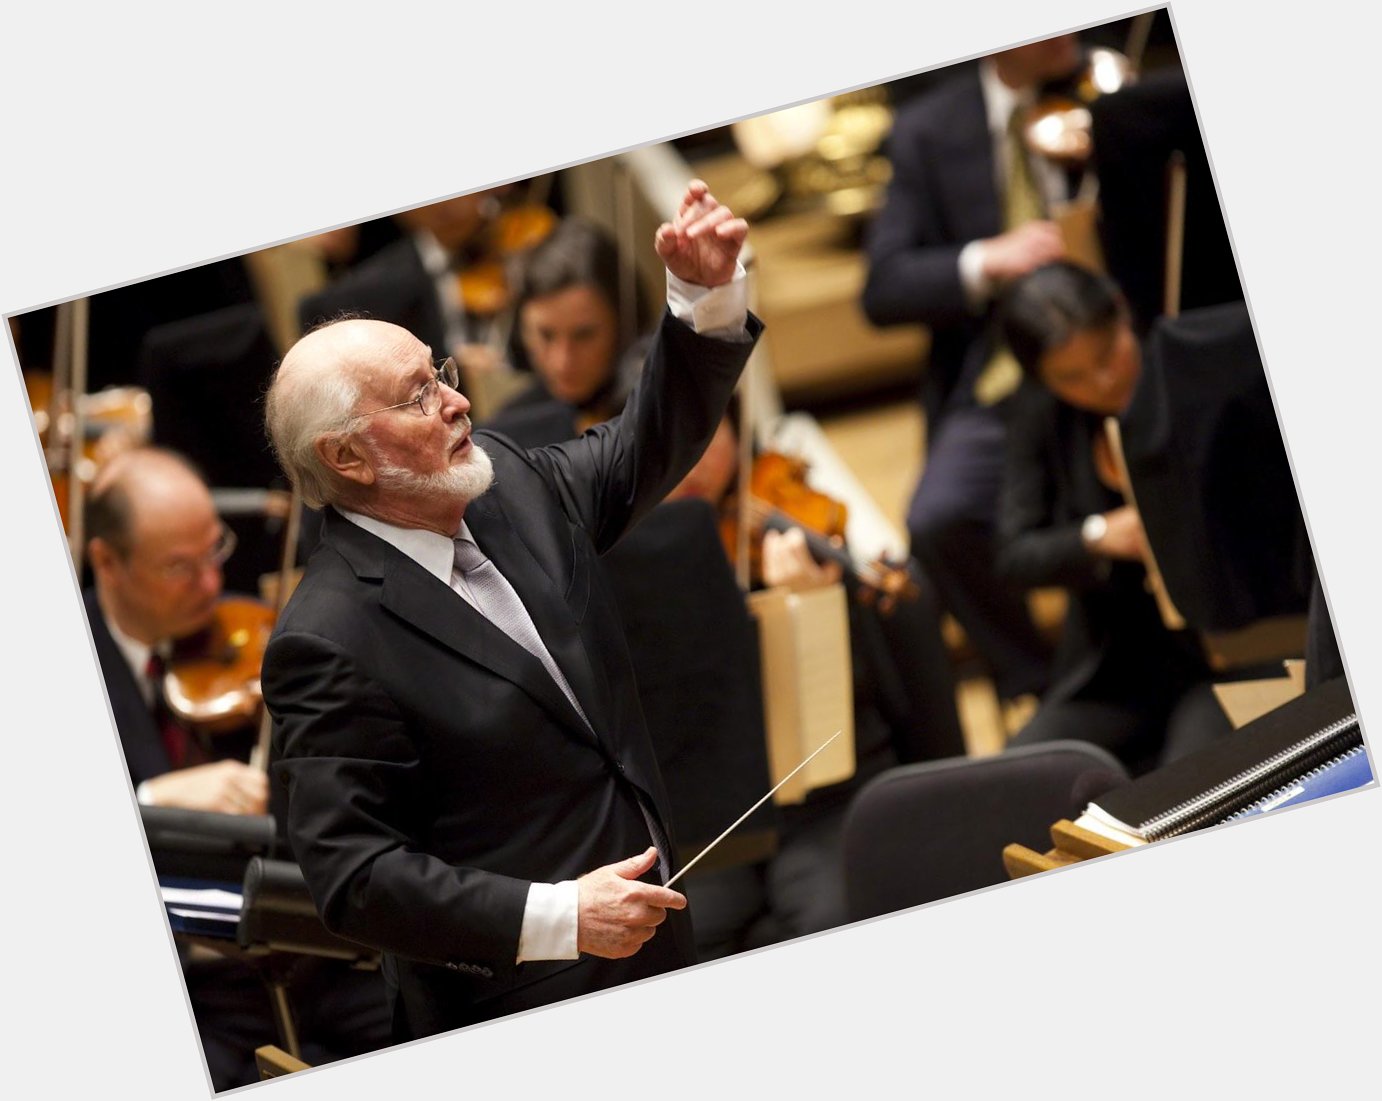  in 1932: John Williams, the composer of the first three films is born. Happy birthday John! 